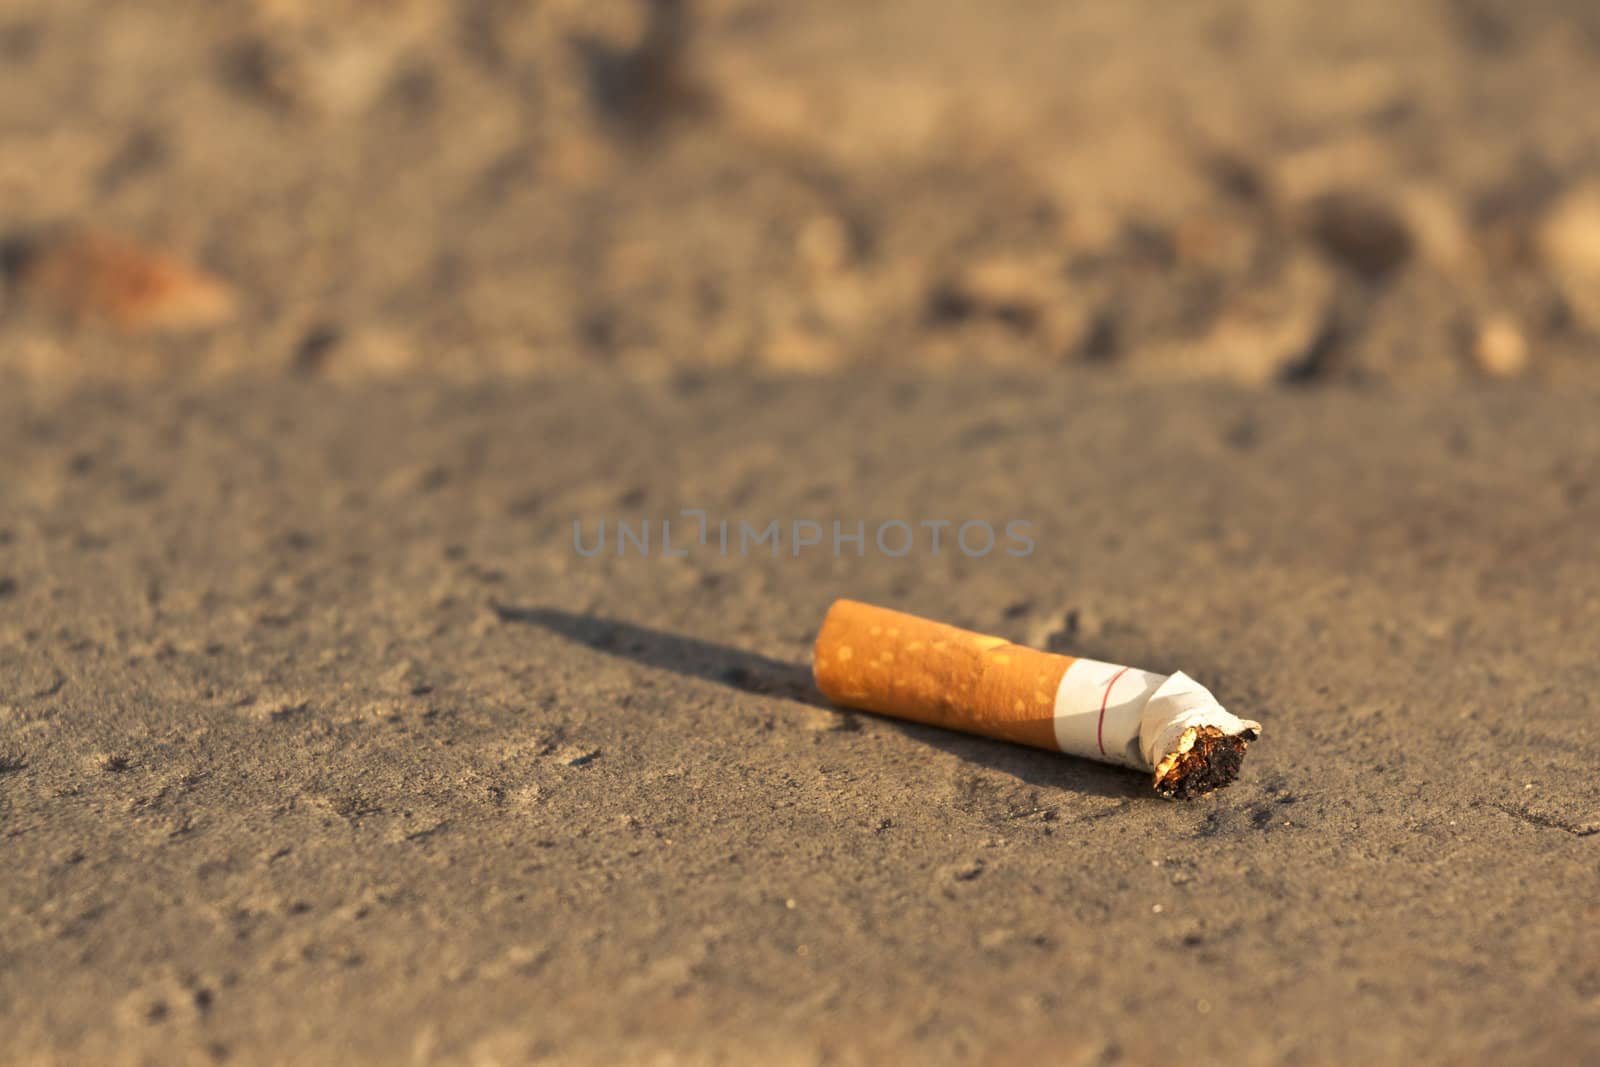 Cigarette fag thrown in the city by Lamarinx